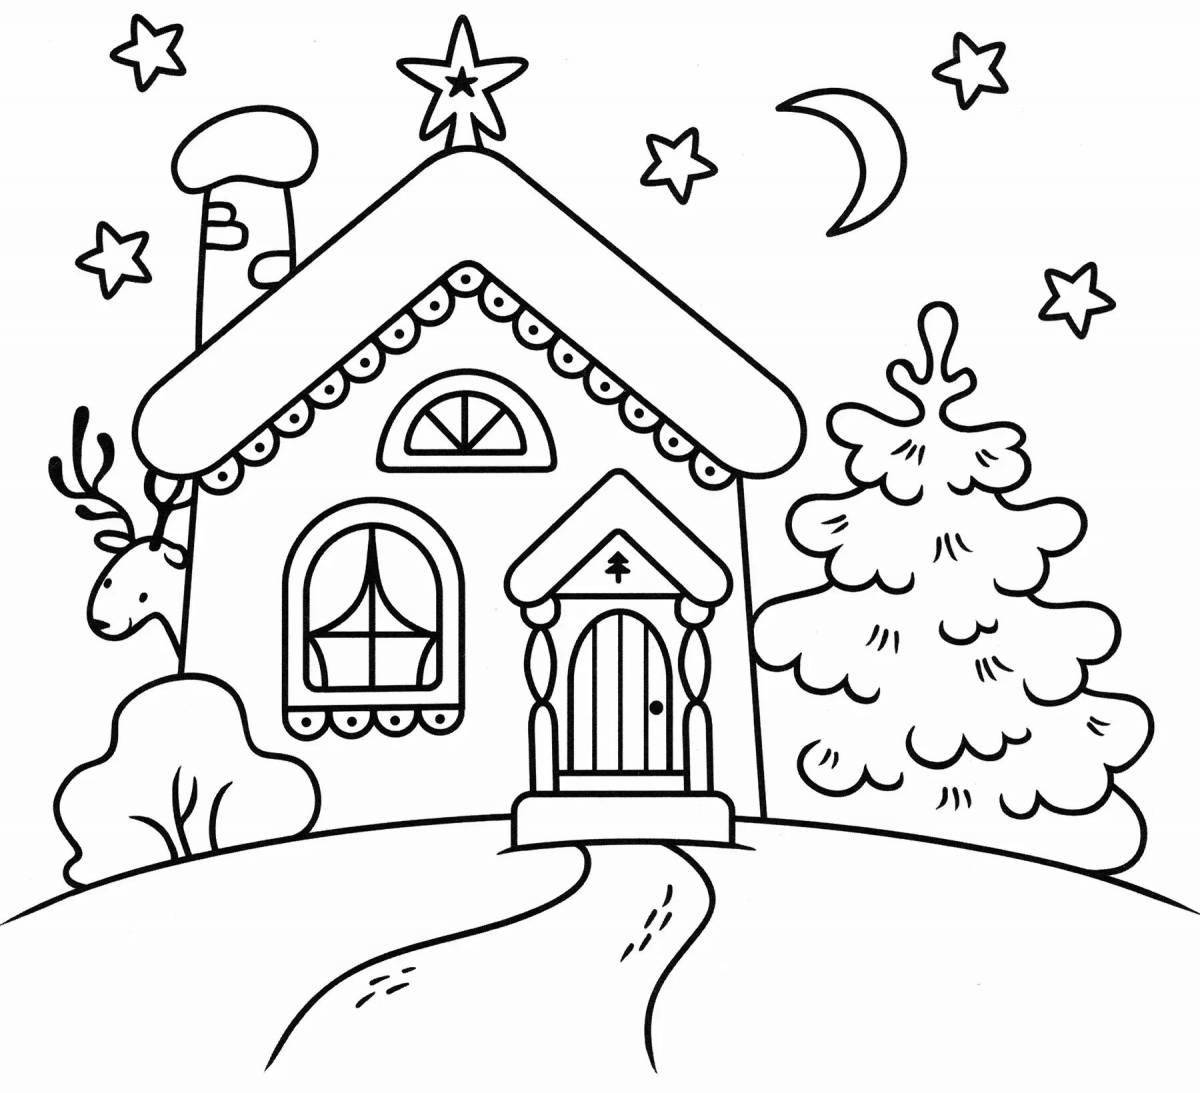 Cheerful winter house coloring for children